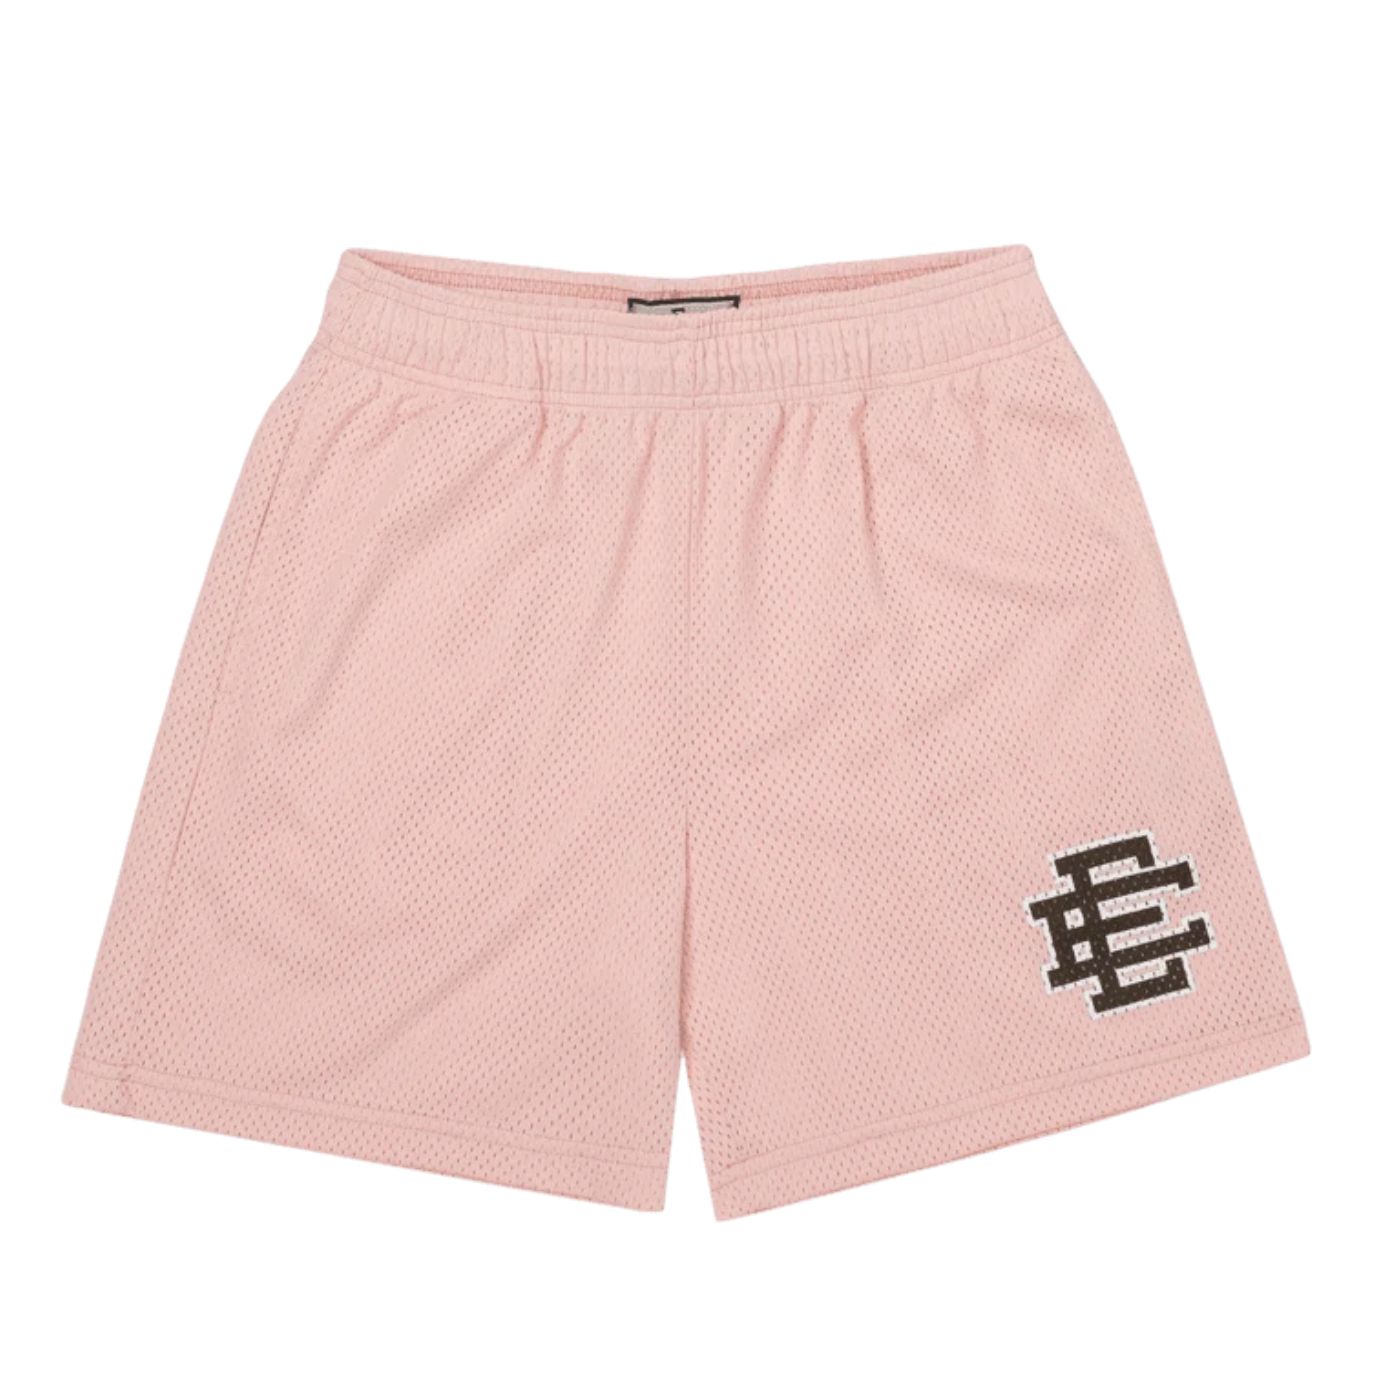 Eric Emanuel Shorts Brown Pink by Eric Emanuel from £140.99